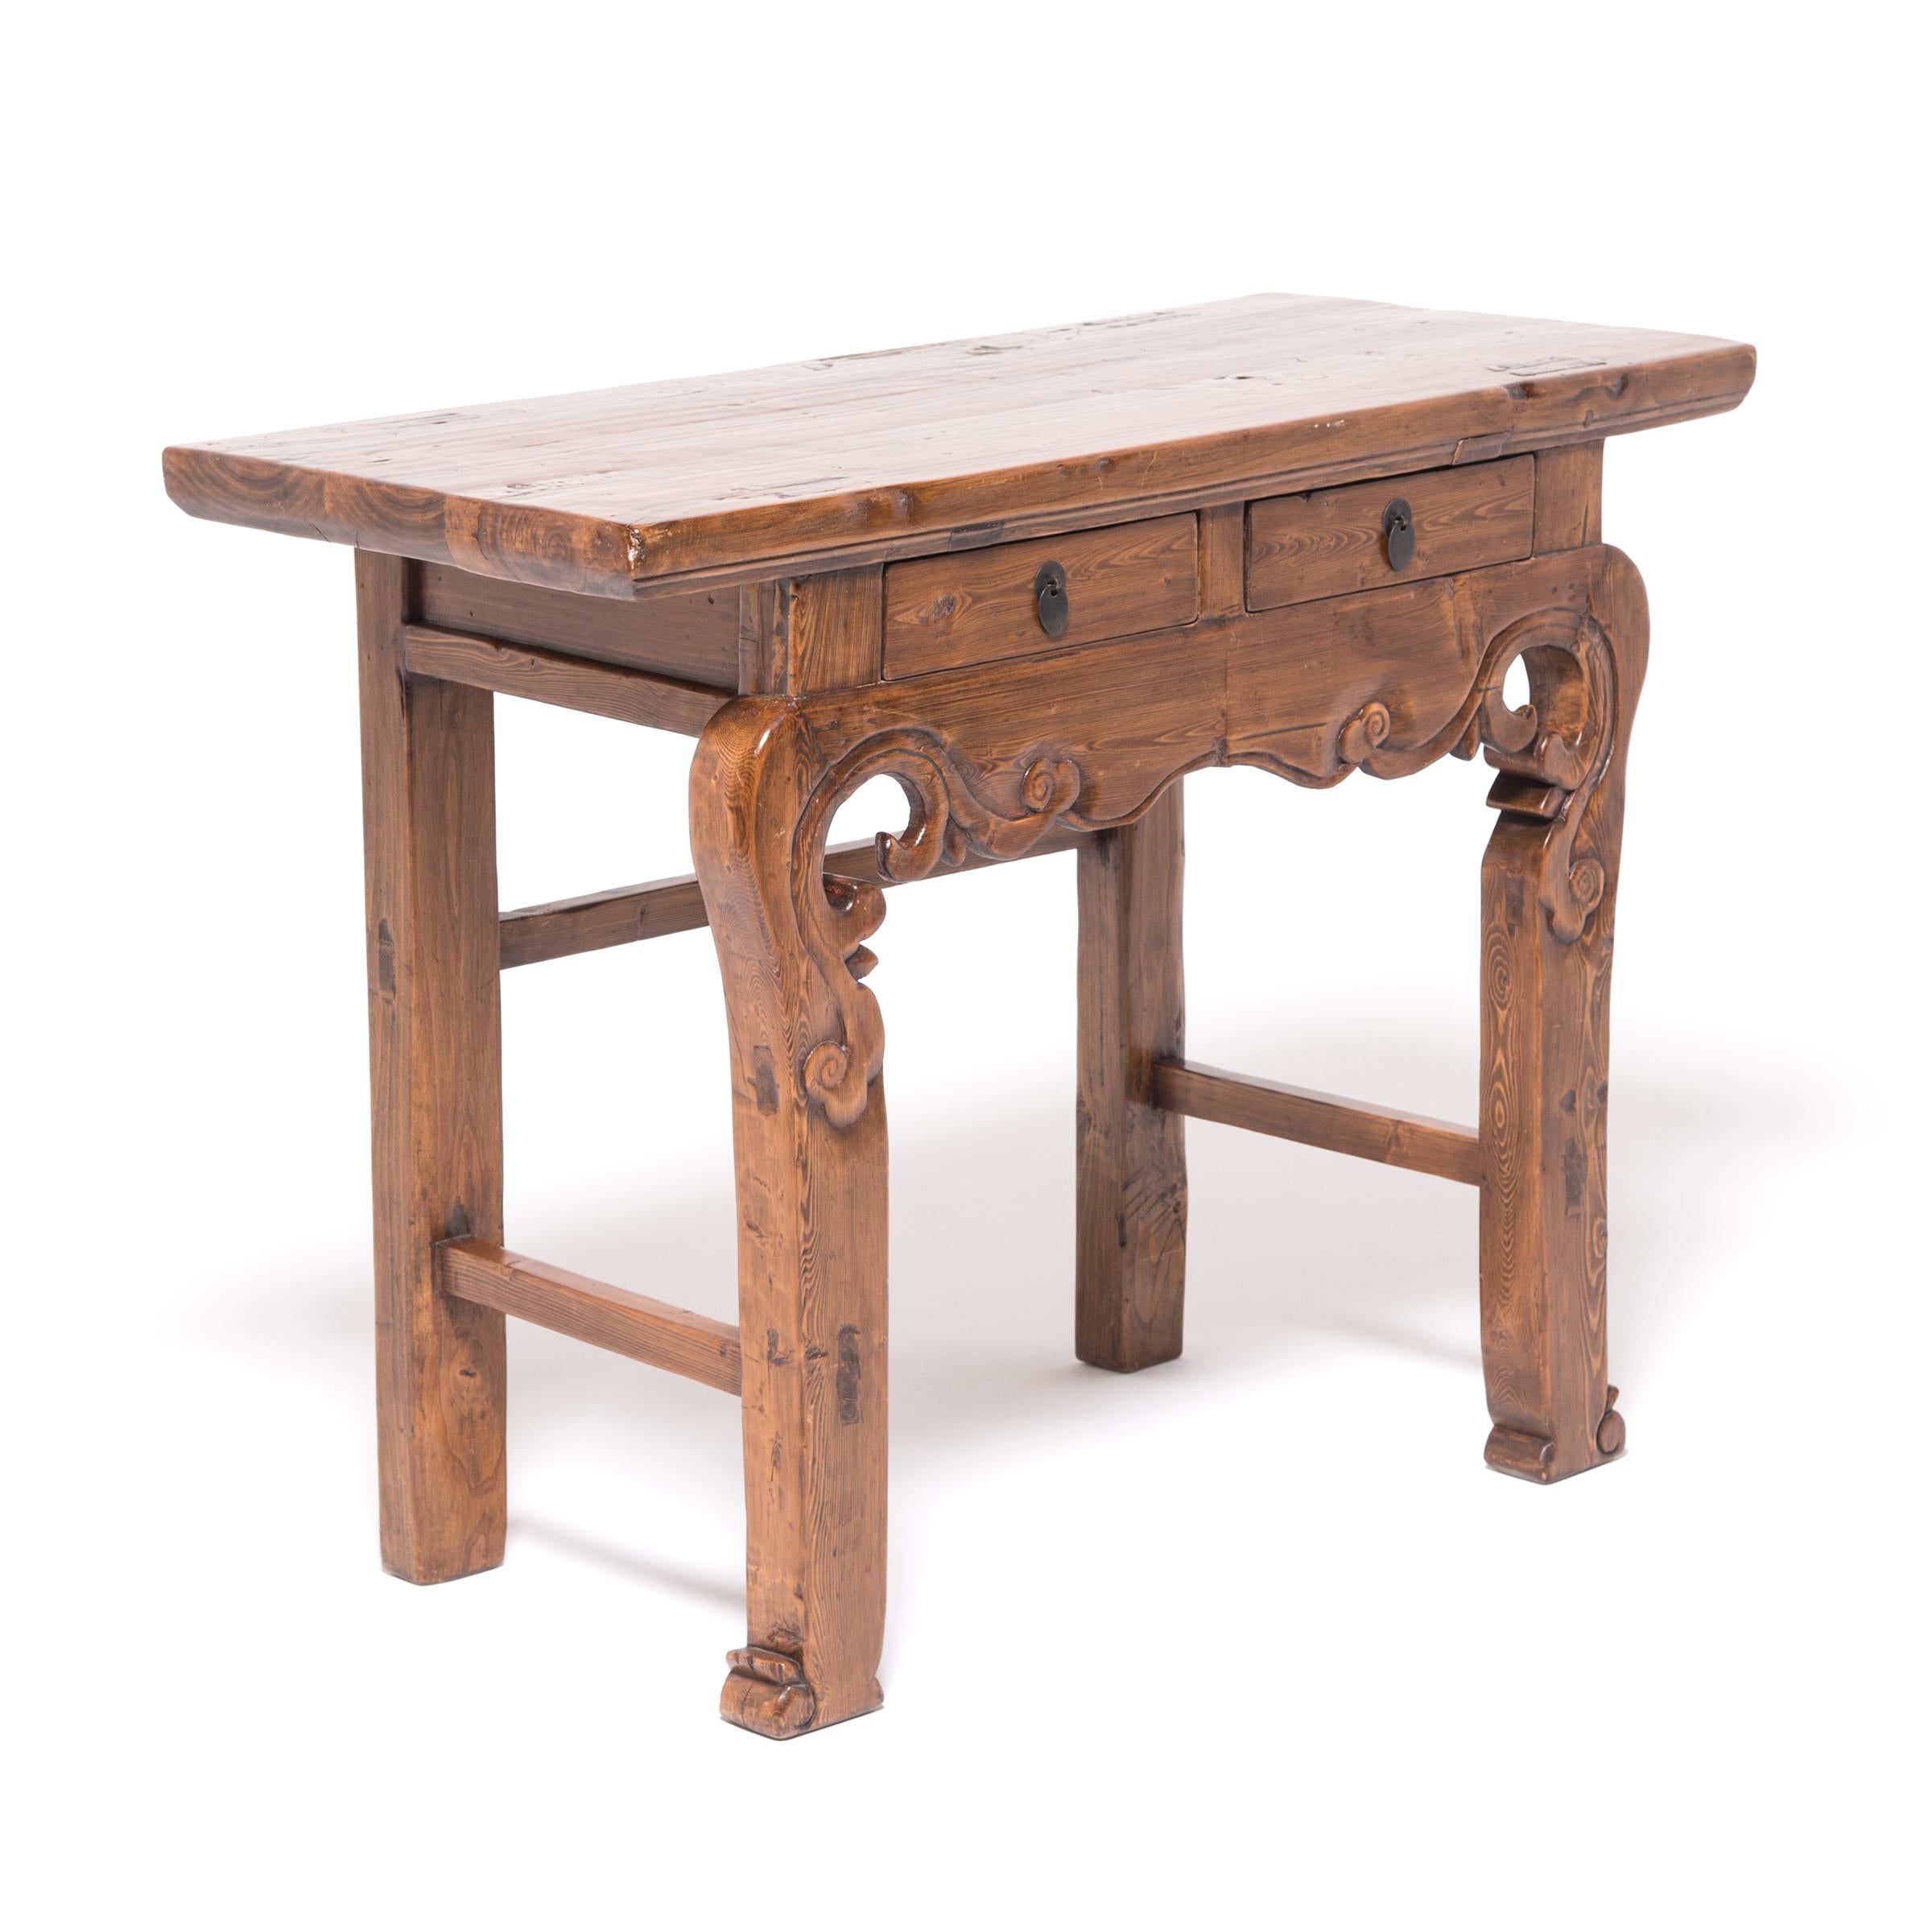 The pronounced grain and warm color of golden pine are wonderfully displayed in the artful carvings of this beautifully proportioned altar table. Expressive scrollwork articulates the table’s graceful flow from apron to leg to feet, marked by